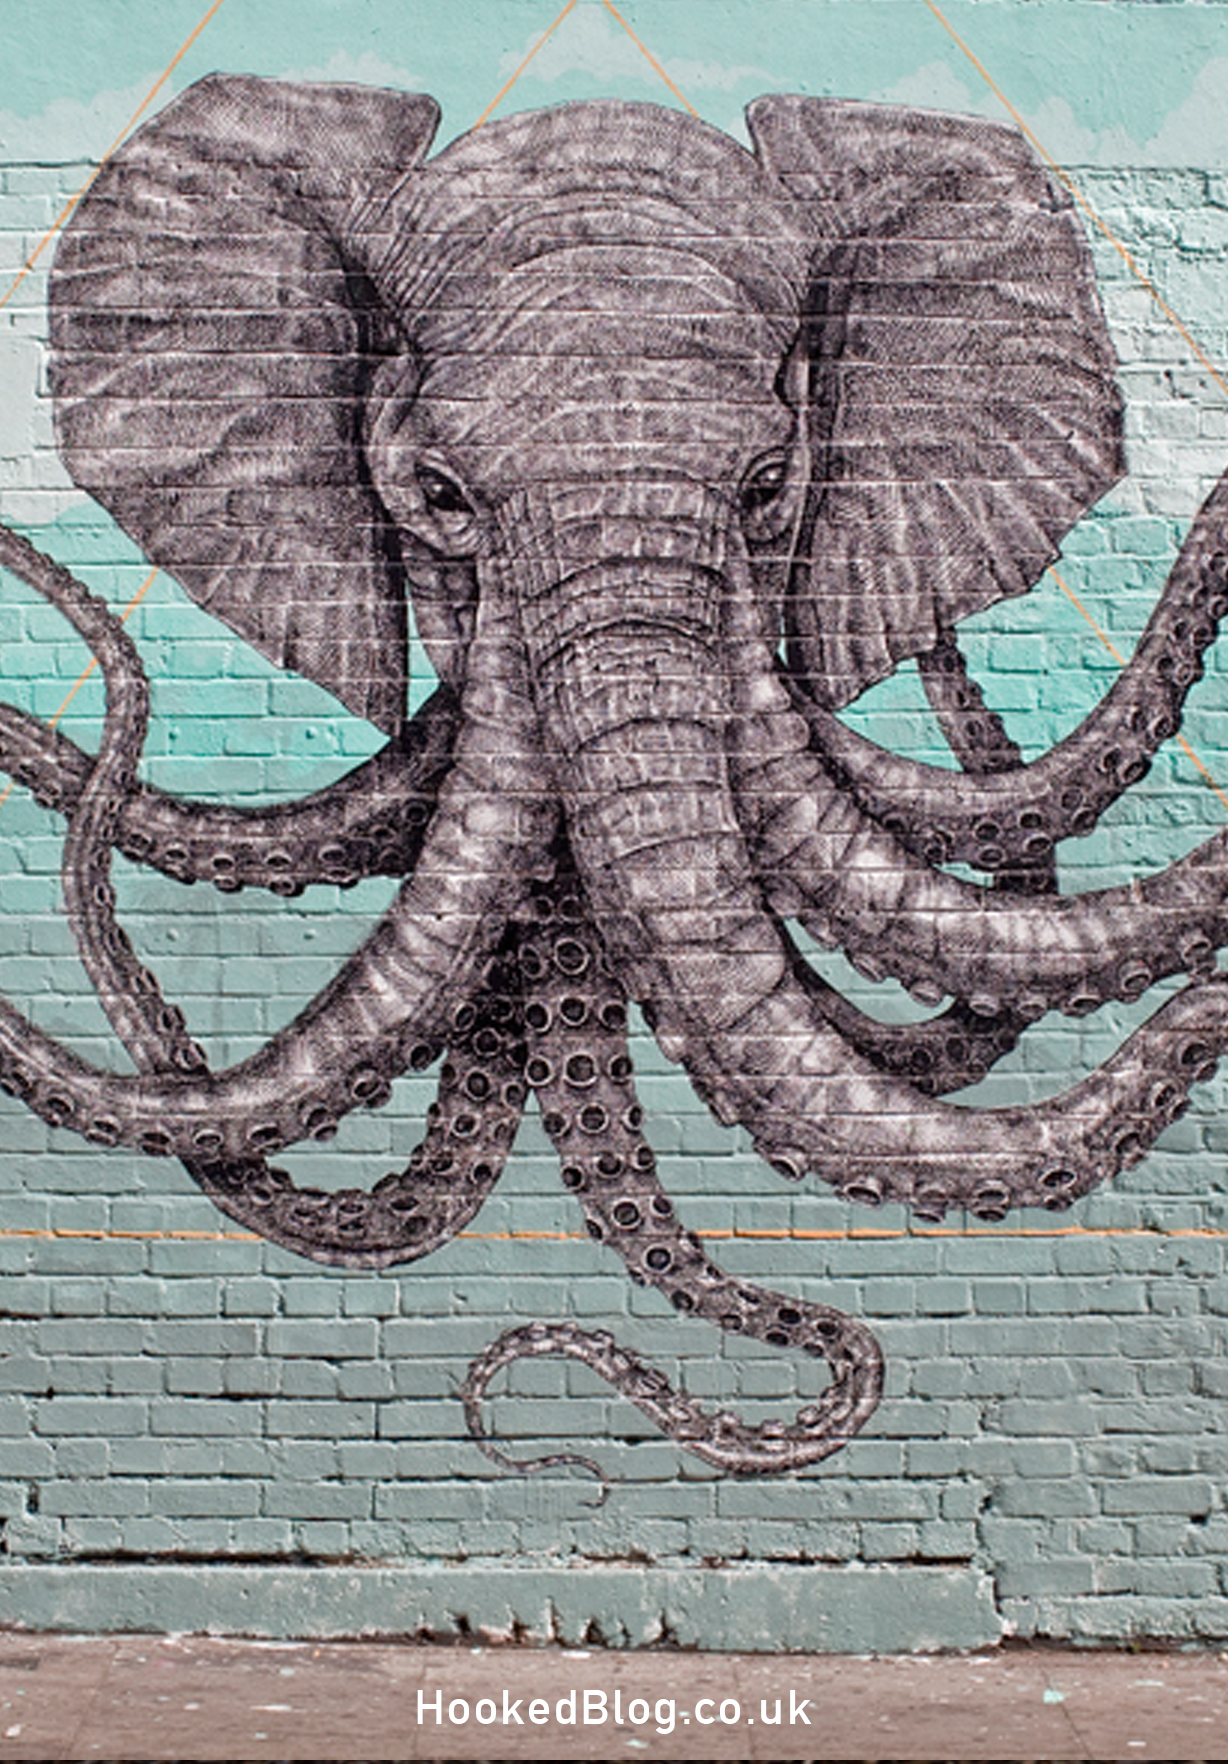 Alexis Diaz finishes his Elephant Octopus London Mural